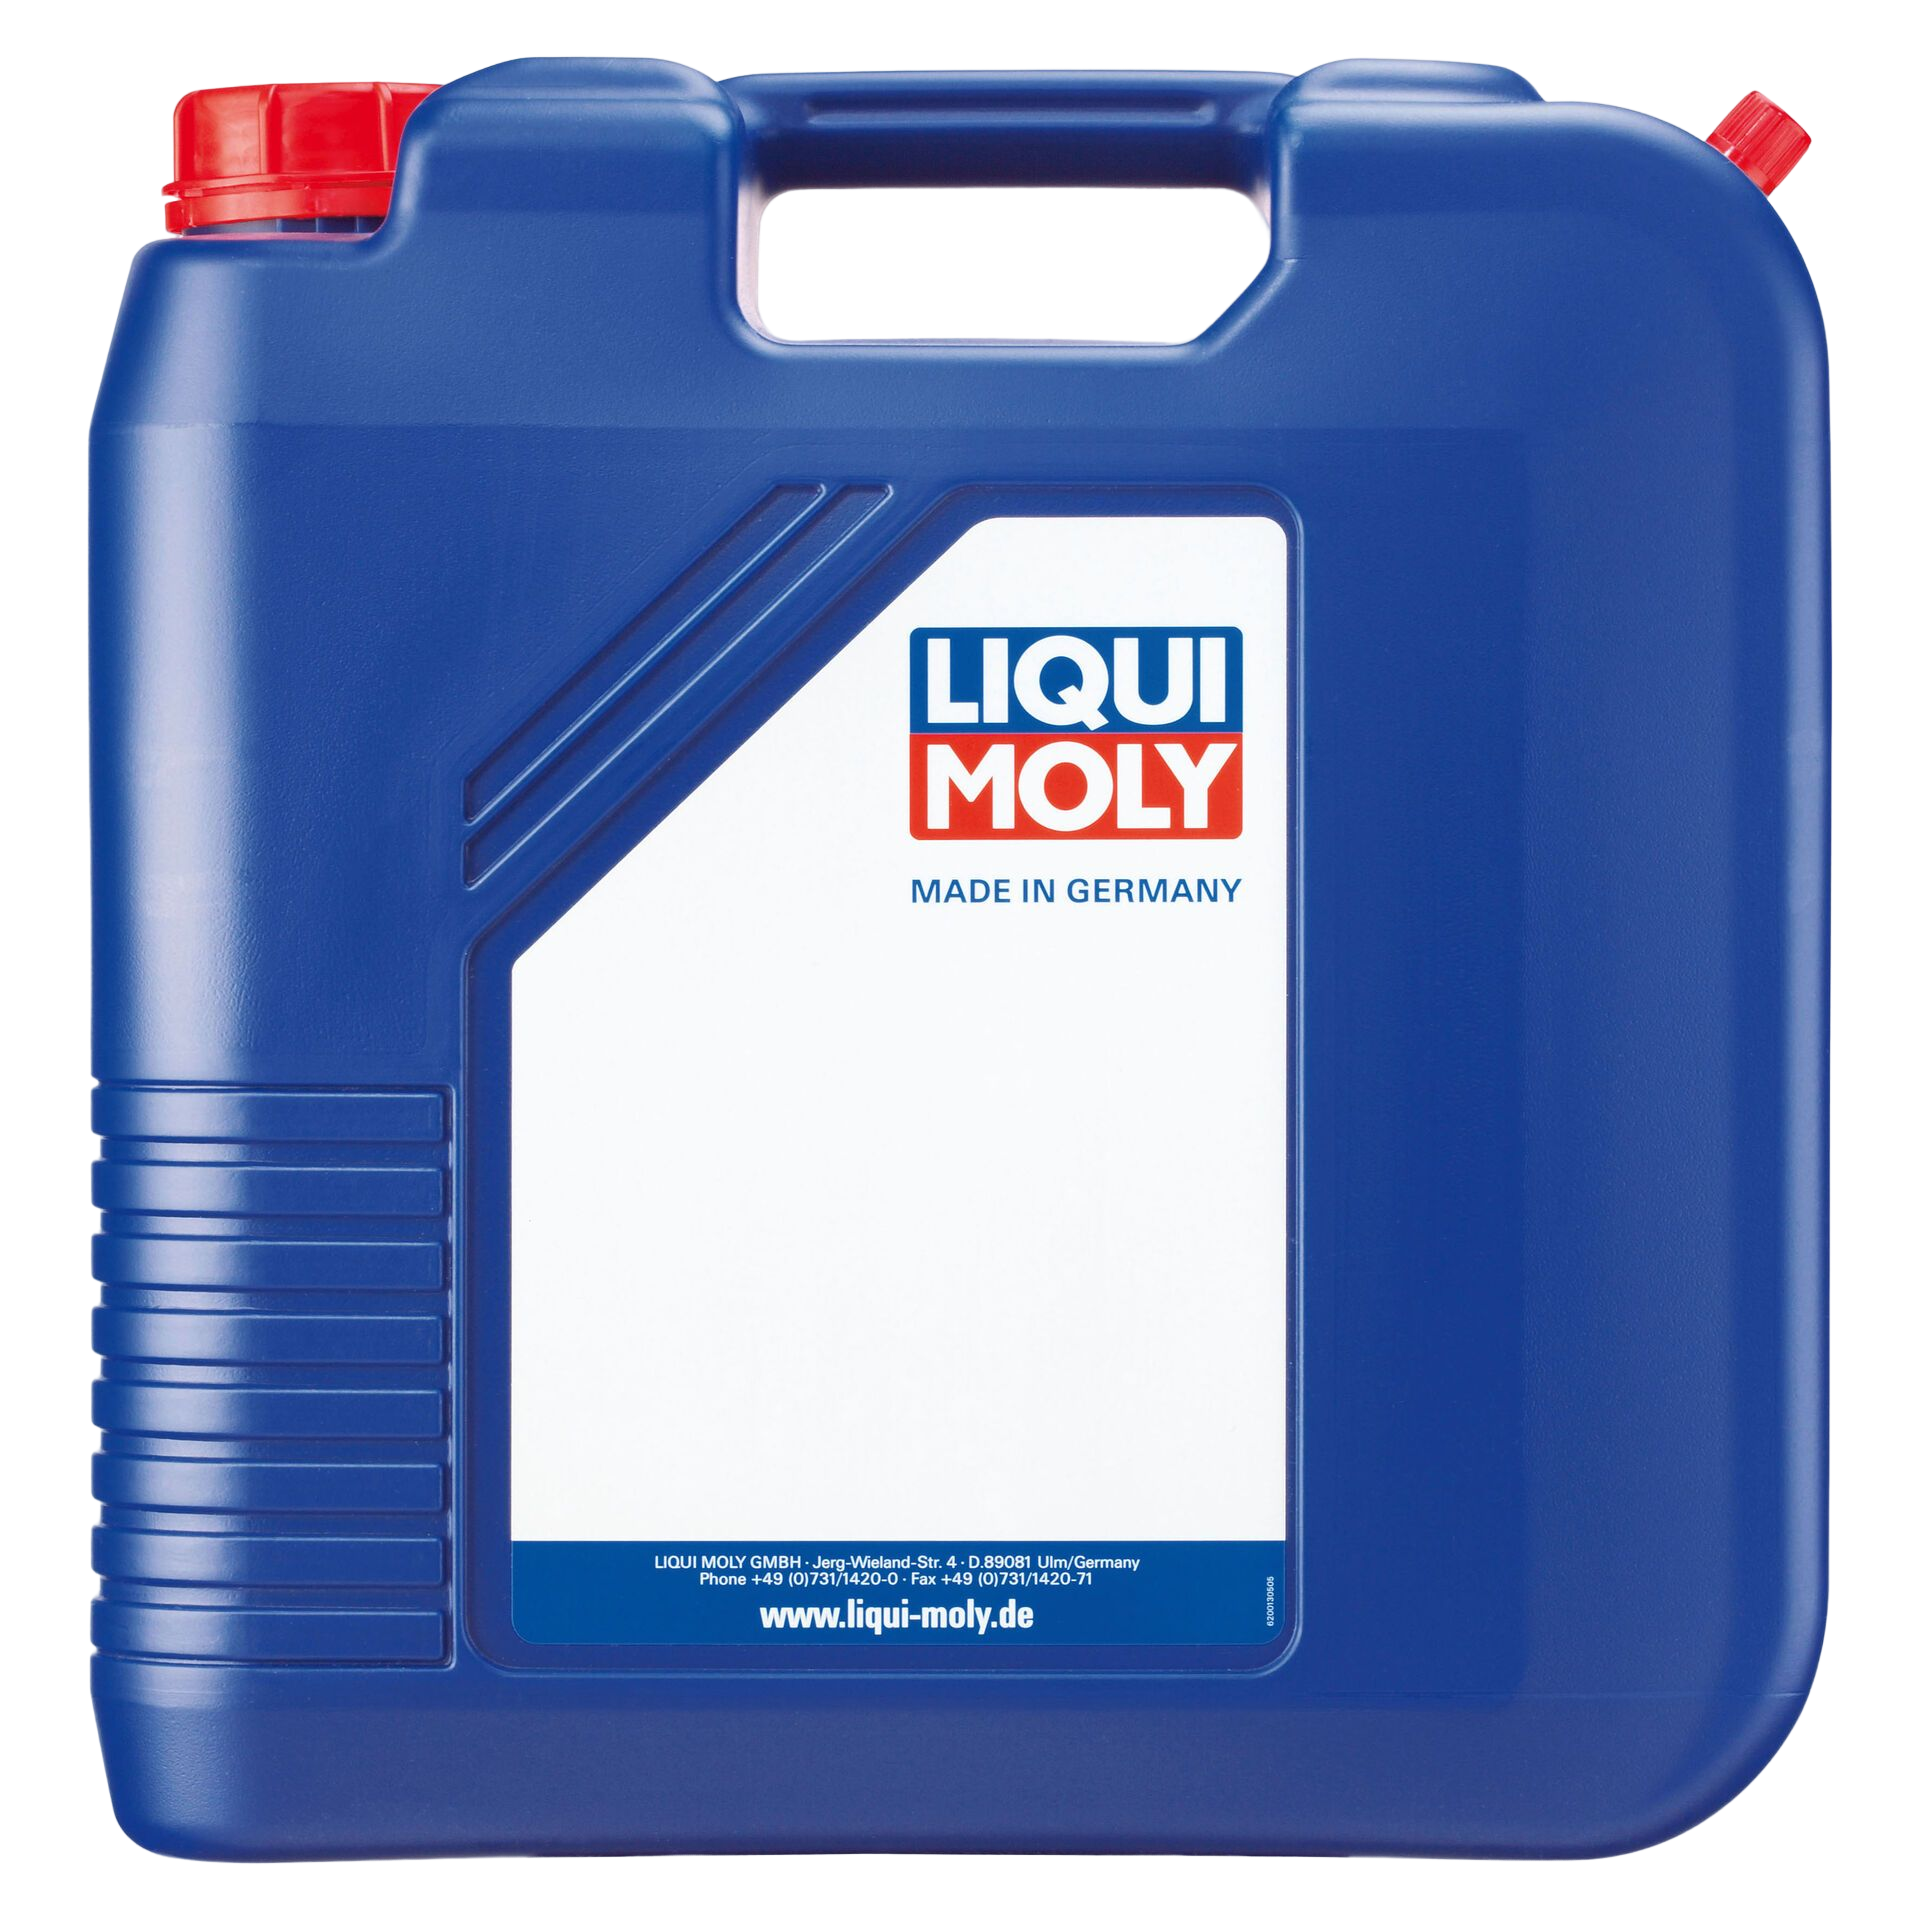 Liqui Moly Transmissieolie Synth ISO VG 220, 20 lt